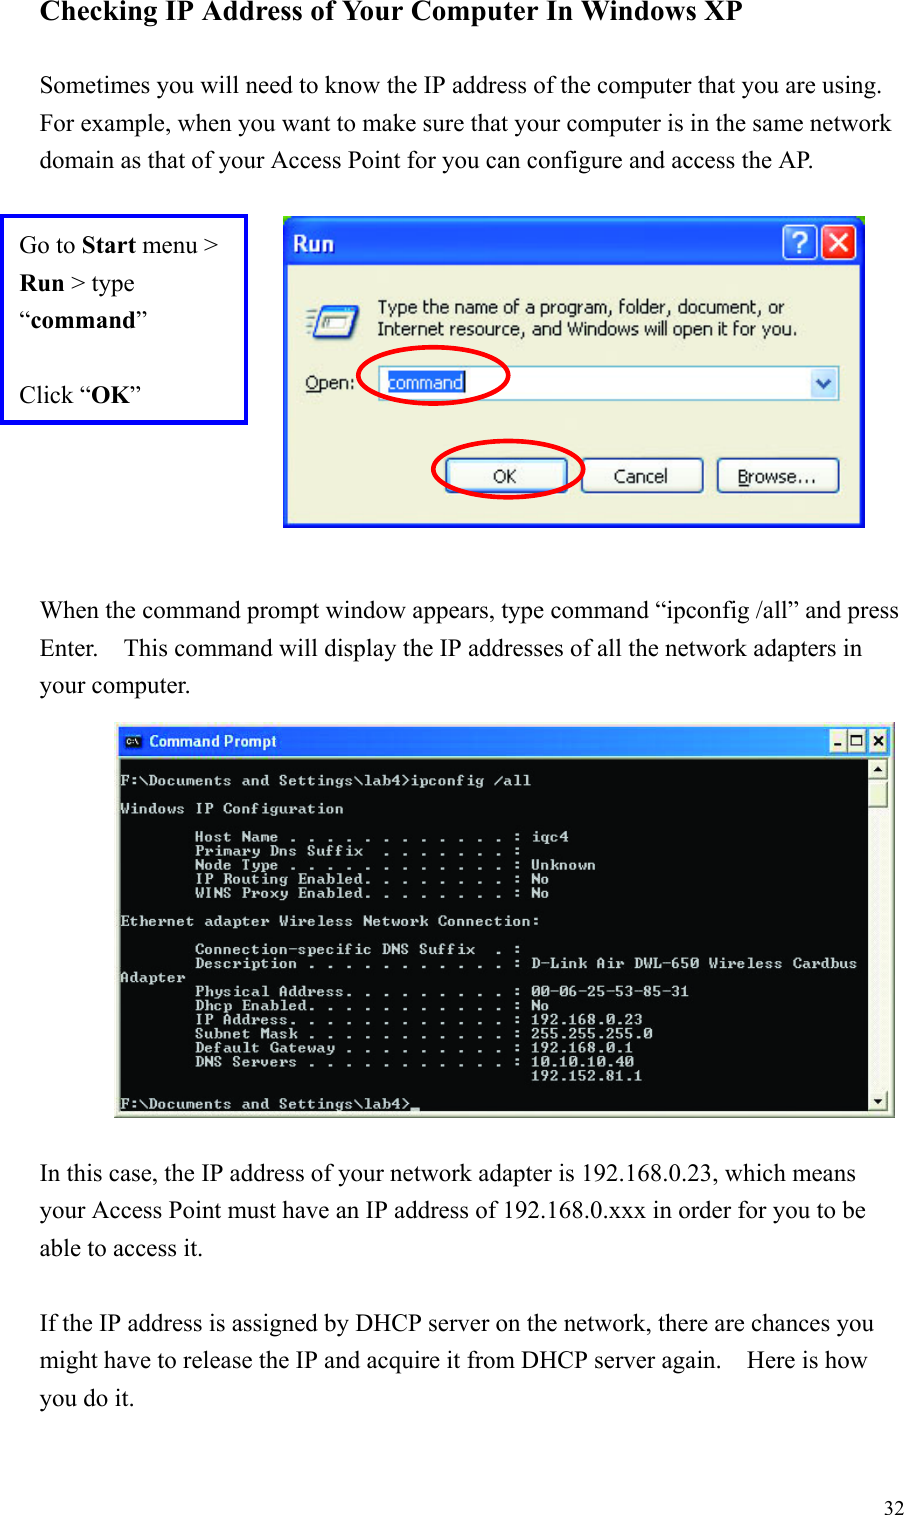 32Checking IP Address of Your Computer In Windows XPSometimes you will need to know the IP address of the computer that you are using.For example, when you want to make sure that your computer is in the same networkdomain as that of your Access Point for you can configure and access the AP.When the command prompt window appears, type command “ipconfig /all” and pressEnter.    This command will display the IP addresses of all the network adapters inyour computer.In this case, the IP address of your network adapter is 192.168.0.23, which meansyour Access Point must have an IP address of 192.168.0.xxx in order for you to beable to access it.If the IP address is assigned by DHCP server on the network, there are chances youmight have to release the IP and acquire it from DHCP server again.    Here is howyou do it.Go to Start menu &gt;Run &gt; type“command”Click “OK”